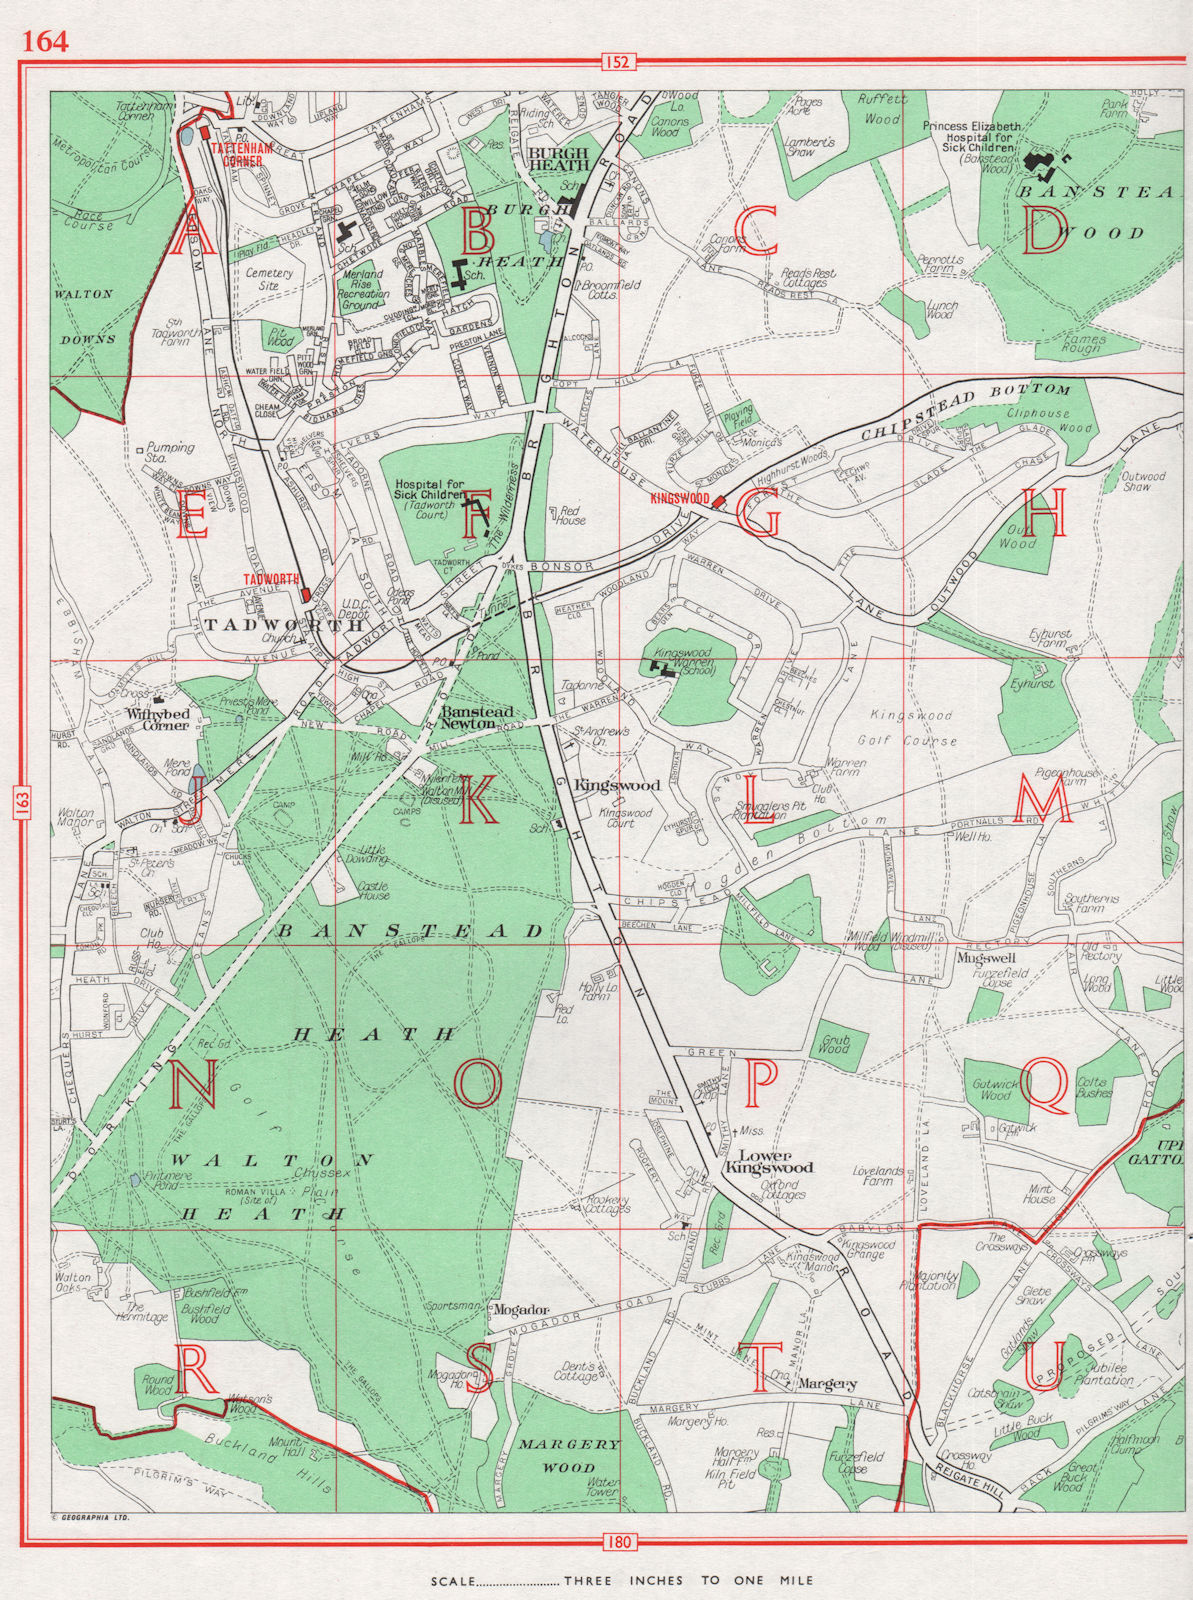 SURREY. Tadworth Kingswood Walton-on-the-Hill Withybed Corner. Pre-M25 1964 map